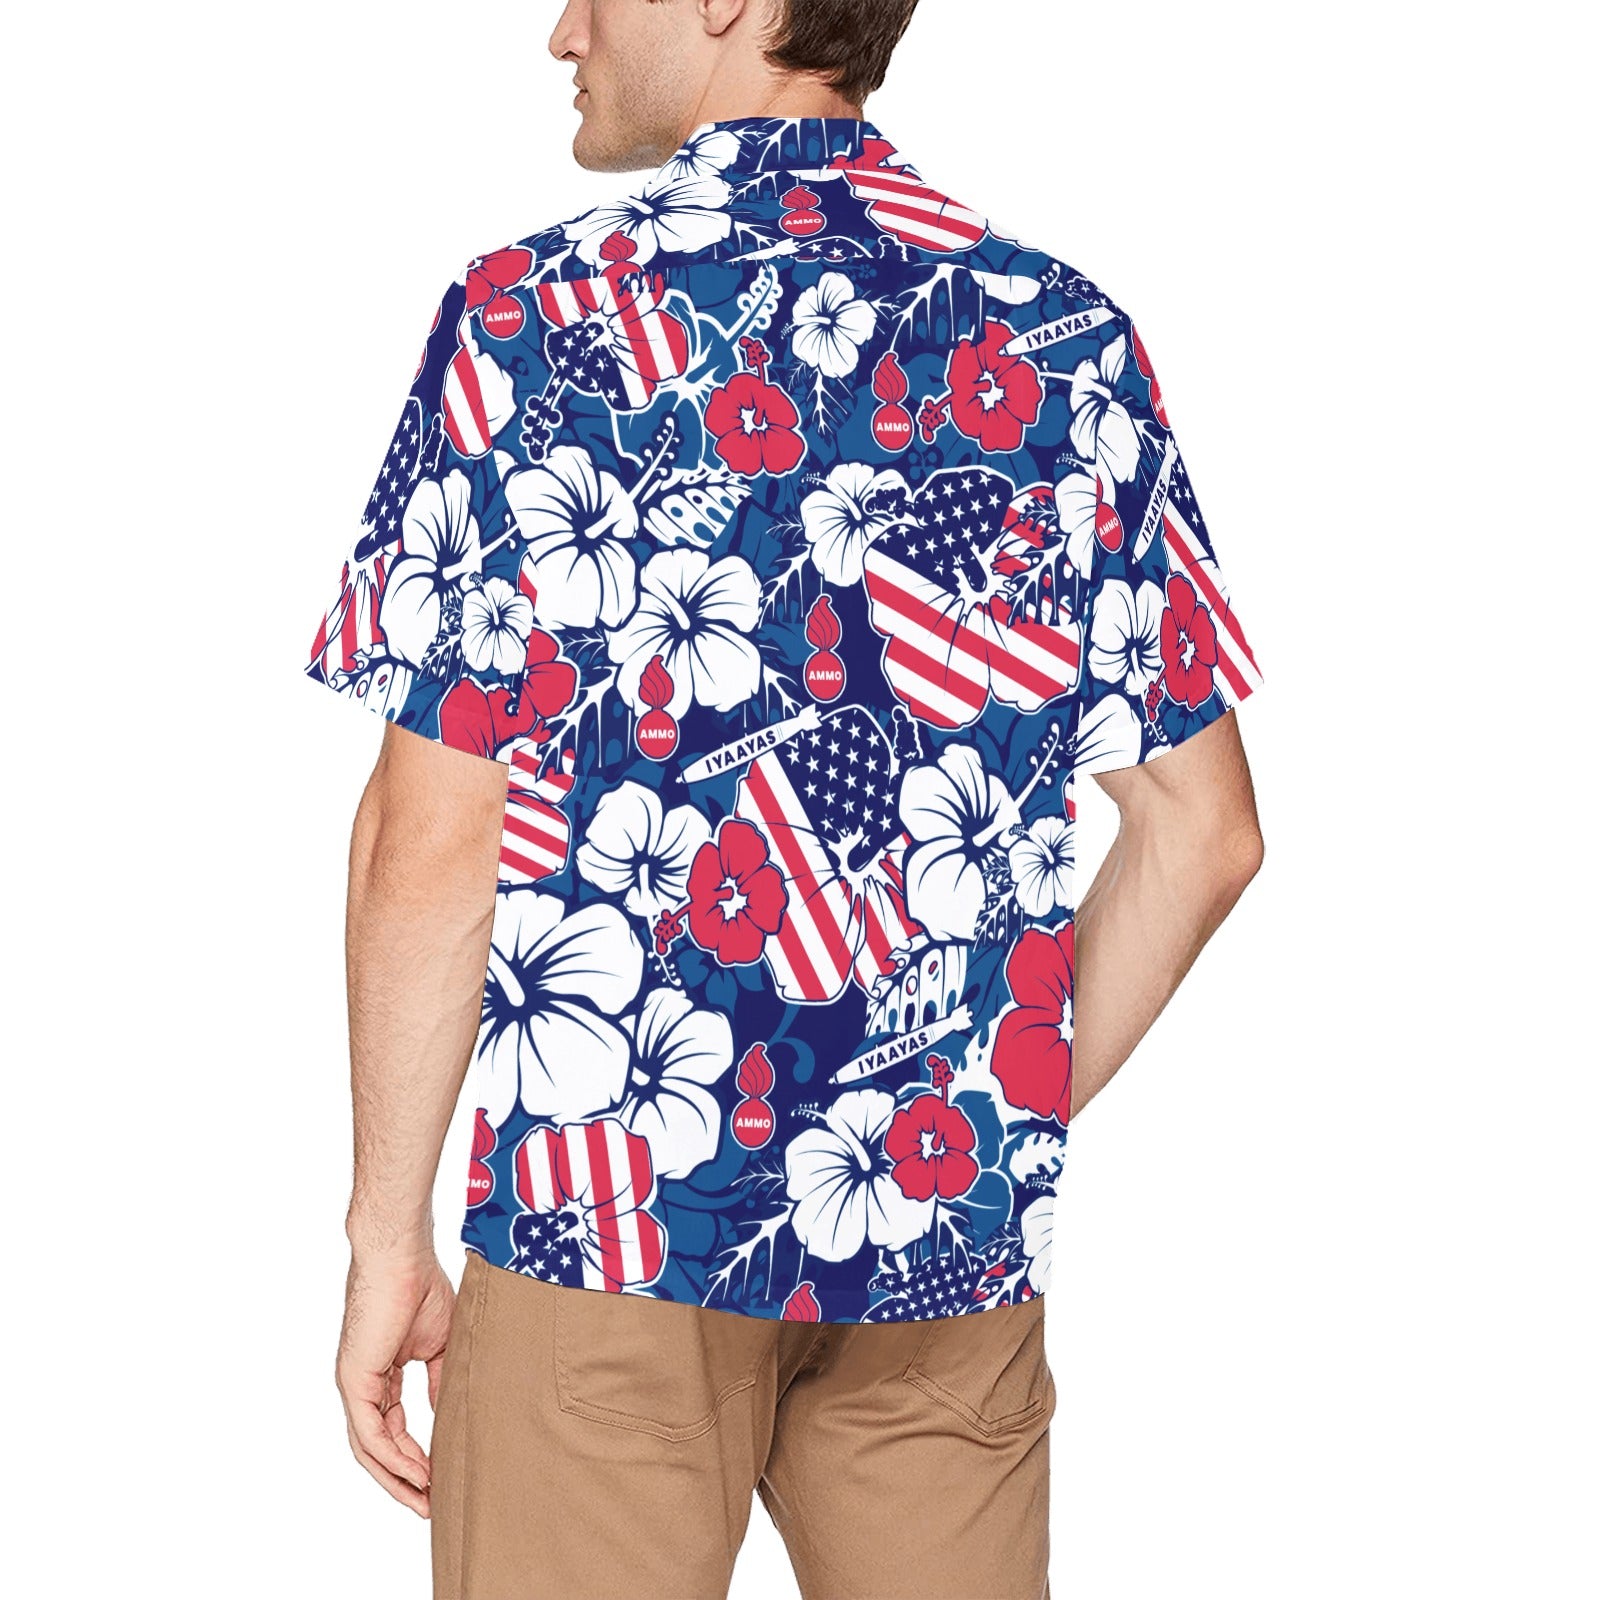 AMMO Hawaiian Shirt Red White and Blue Patriotic Flowers Flags Pisspots  Bombs